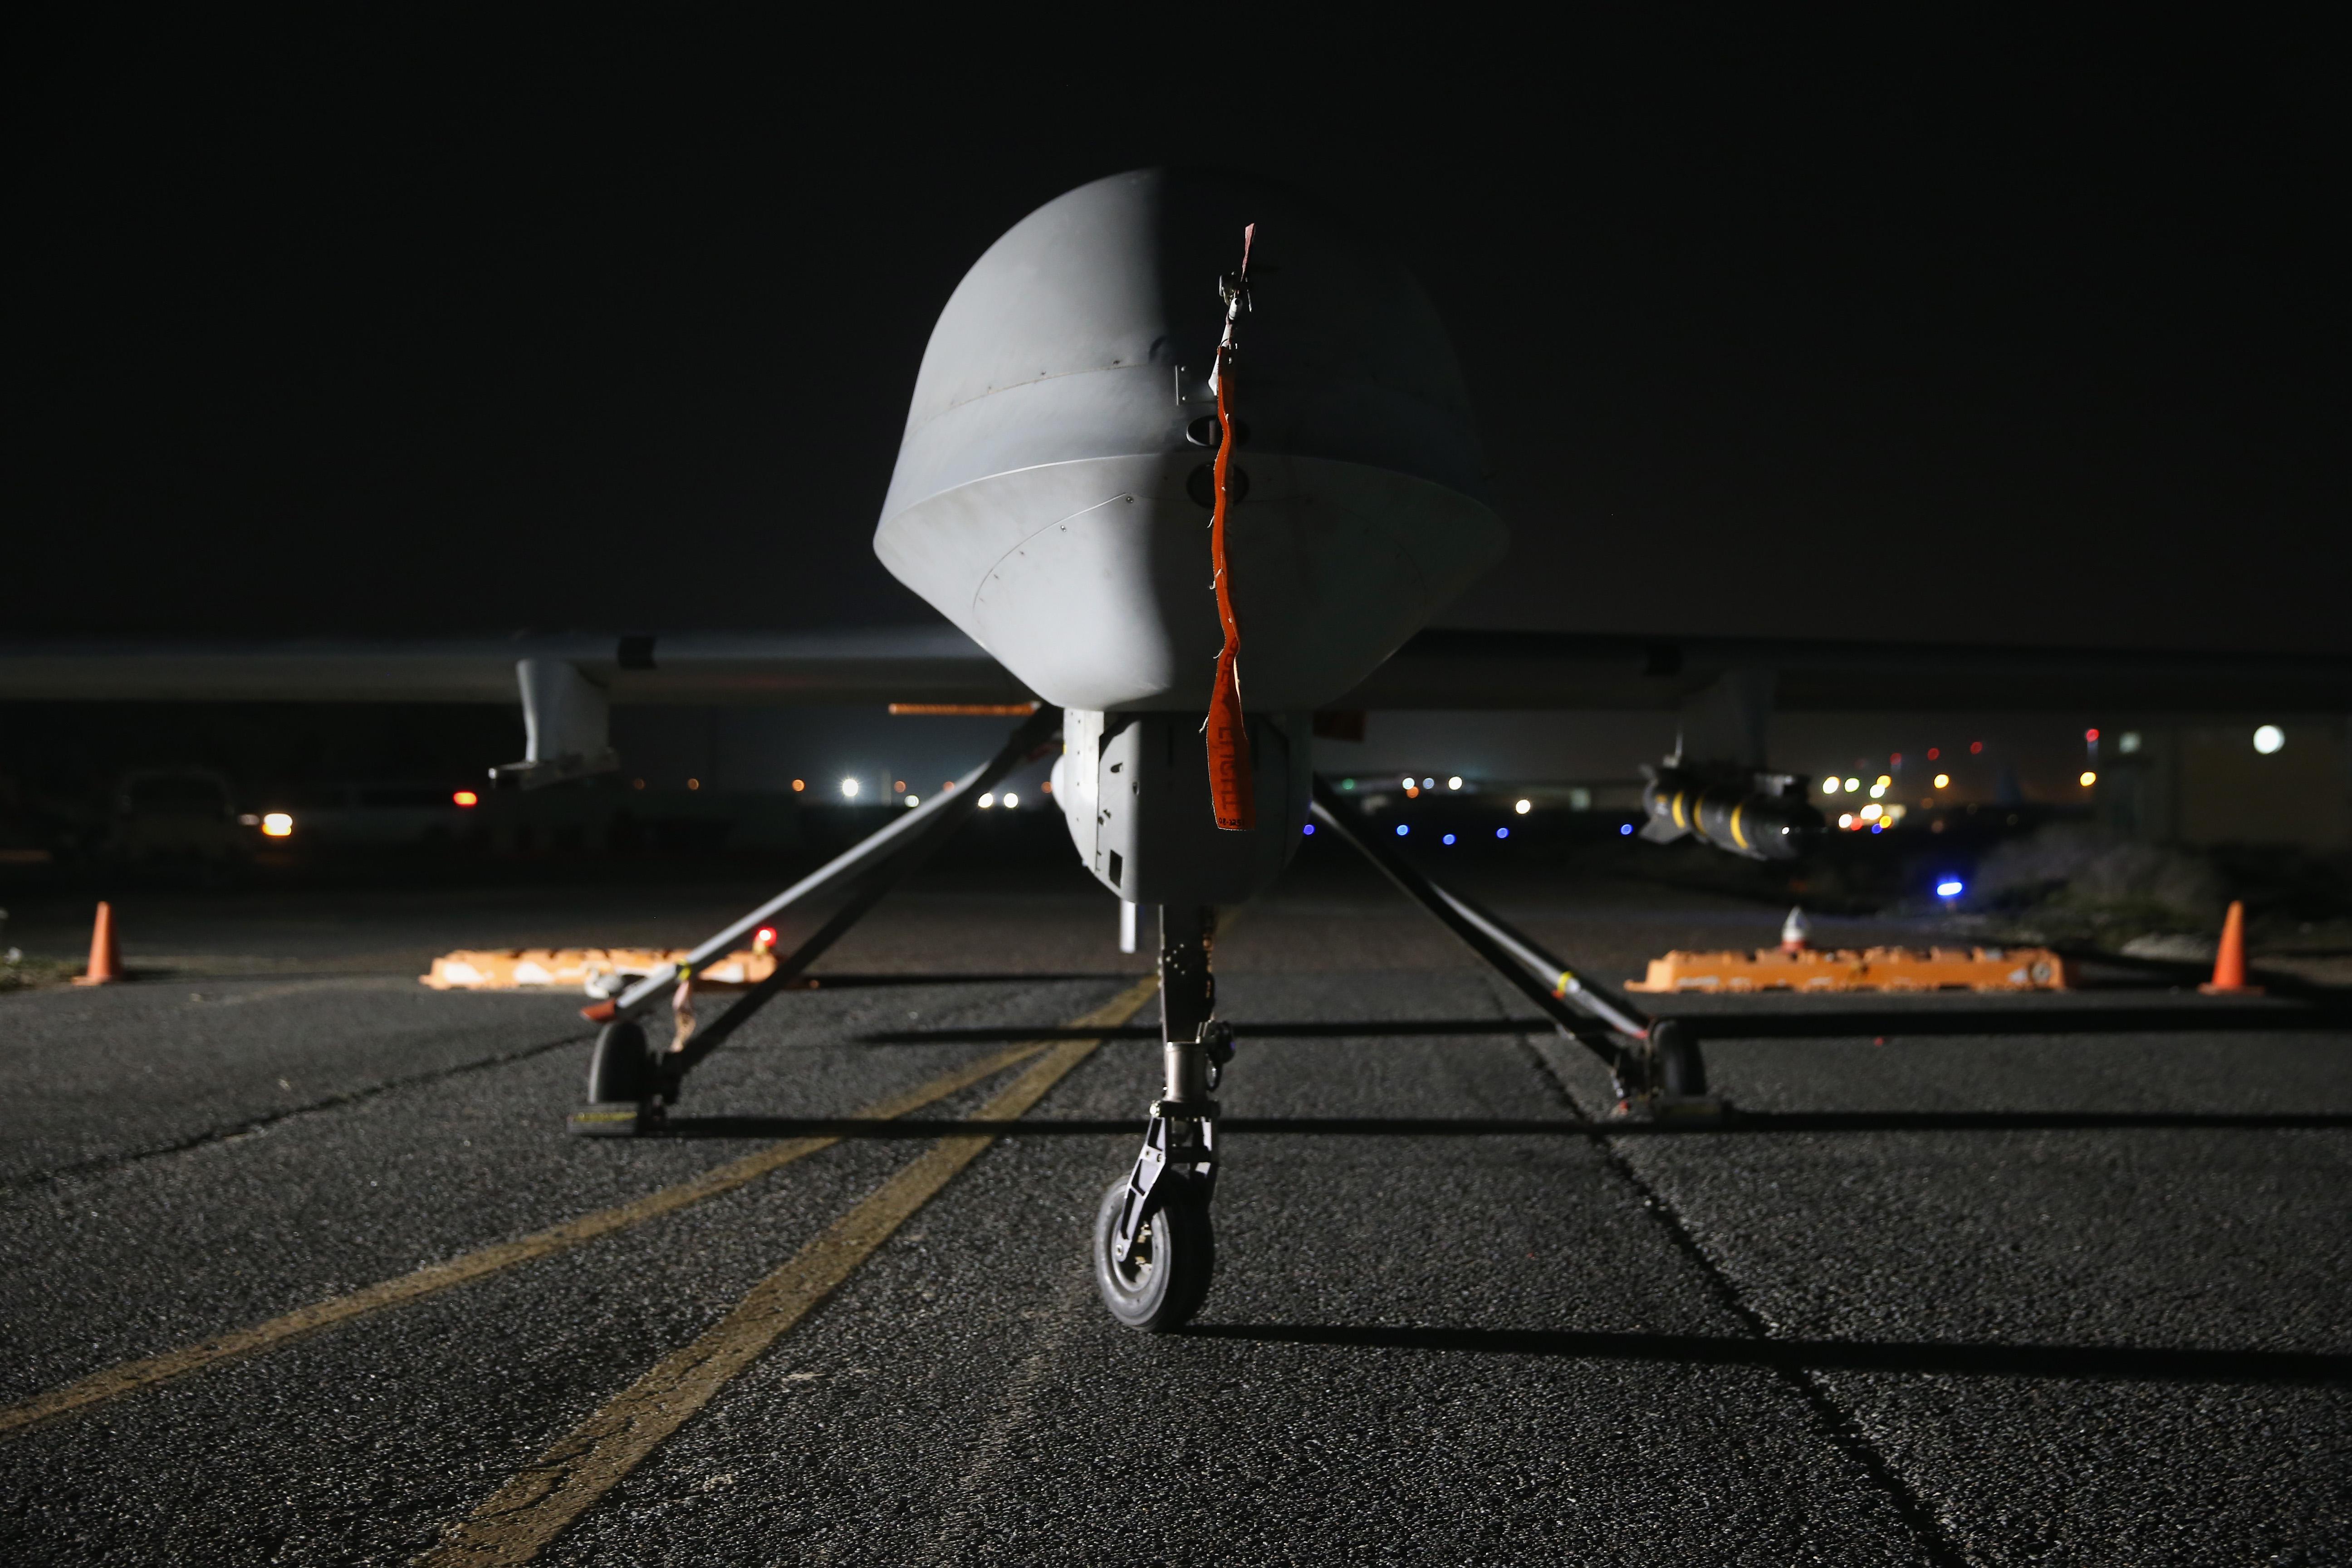 A predator drone on a runway at night.